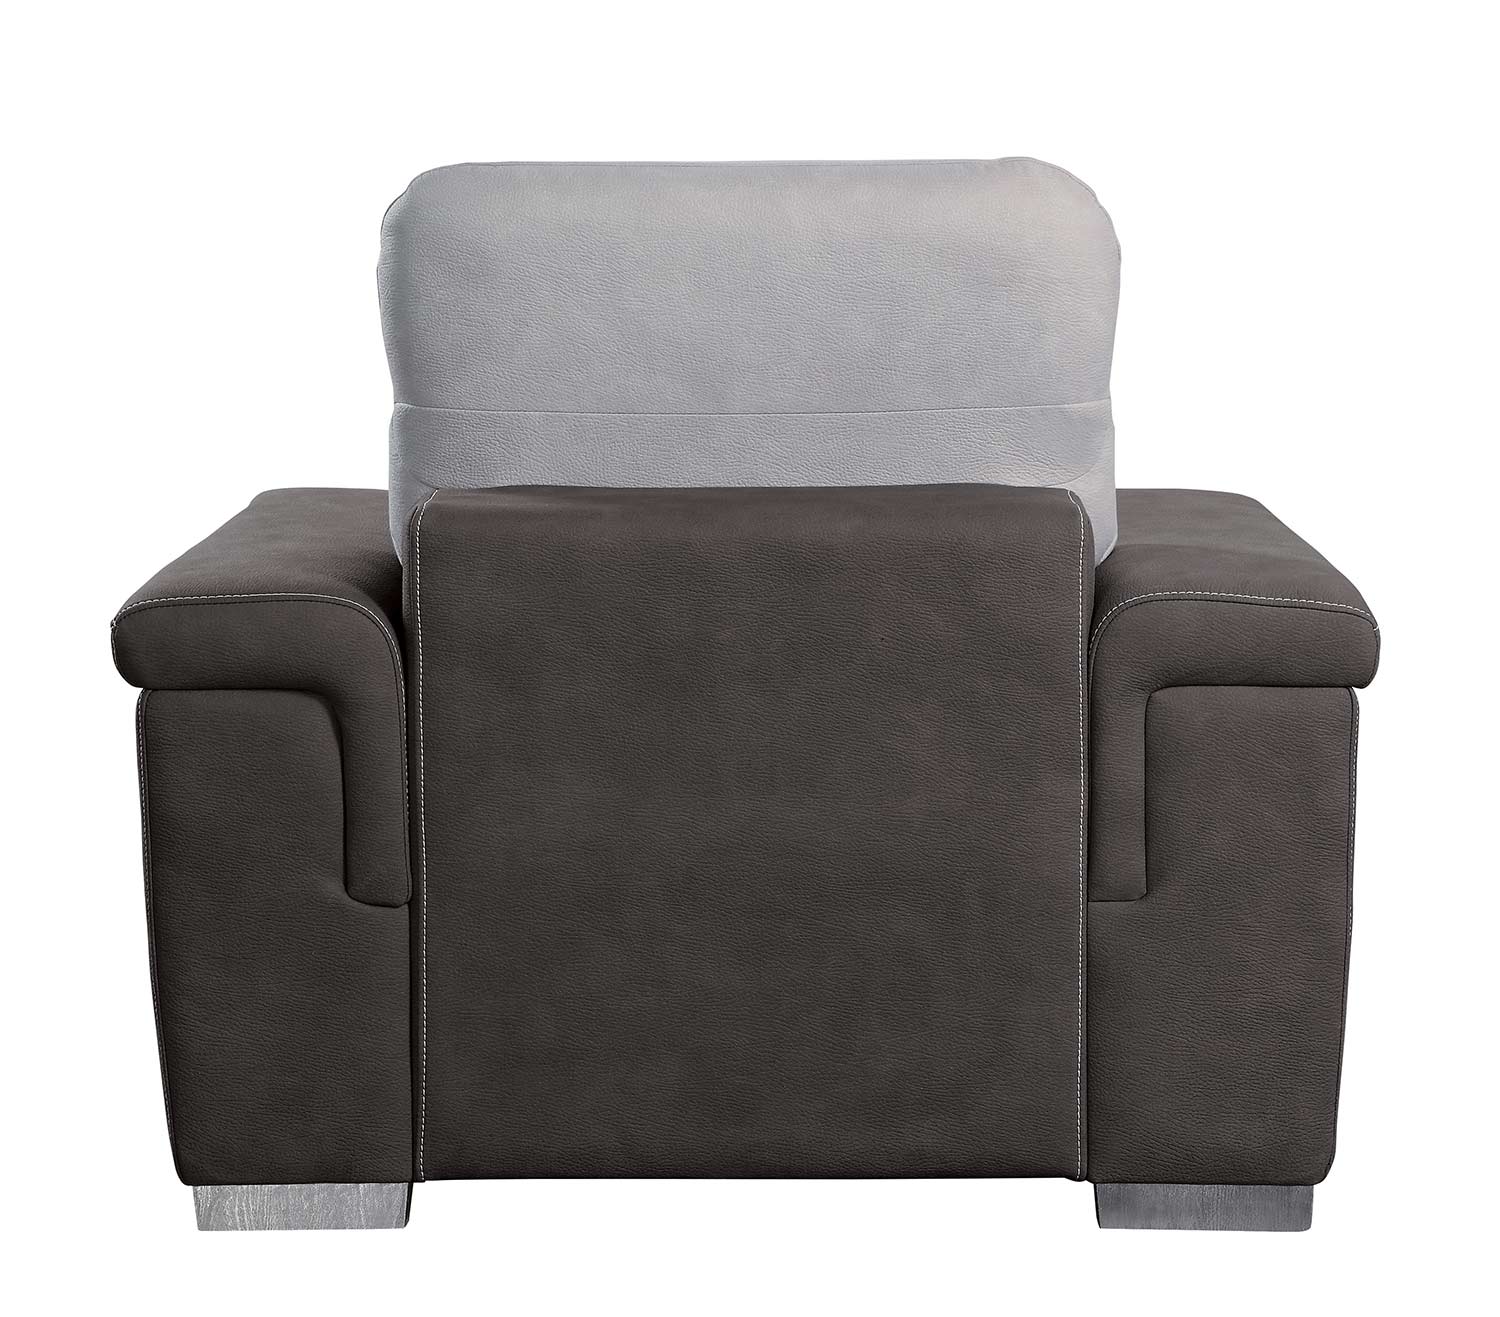 Homelegance Alfio Chair with Pull-out Ottoman - Silver/Chocolate